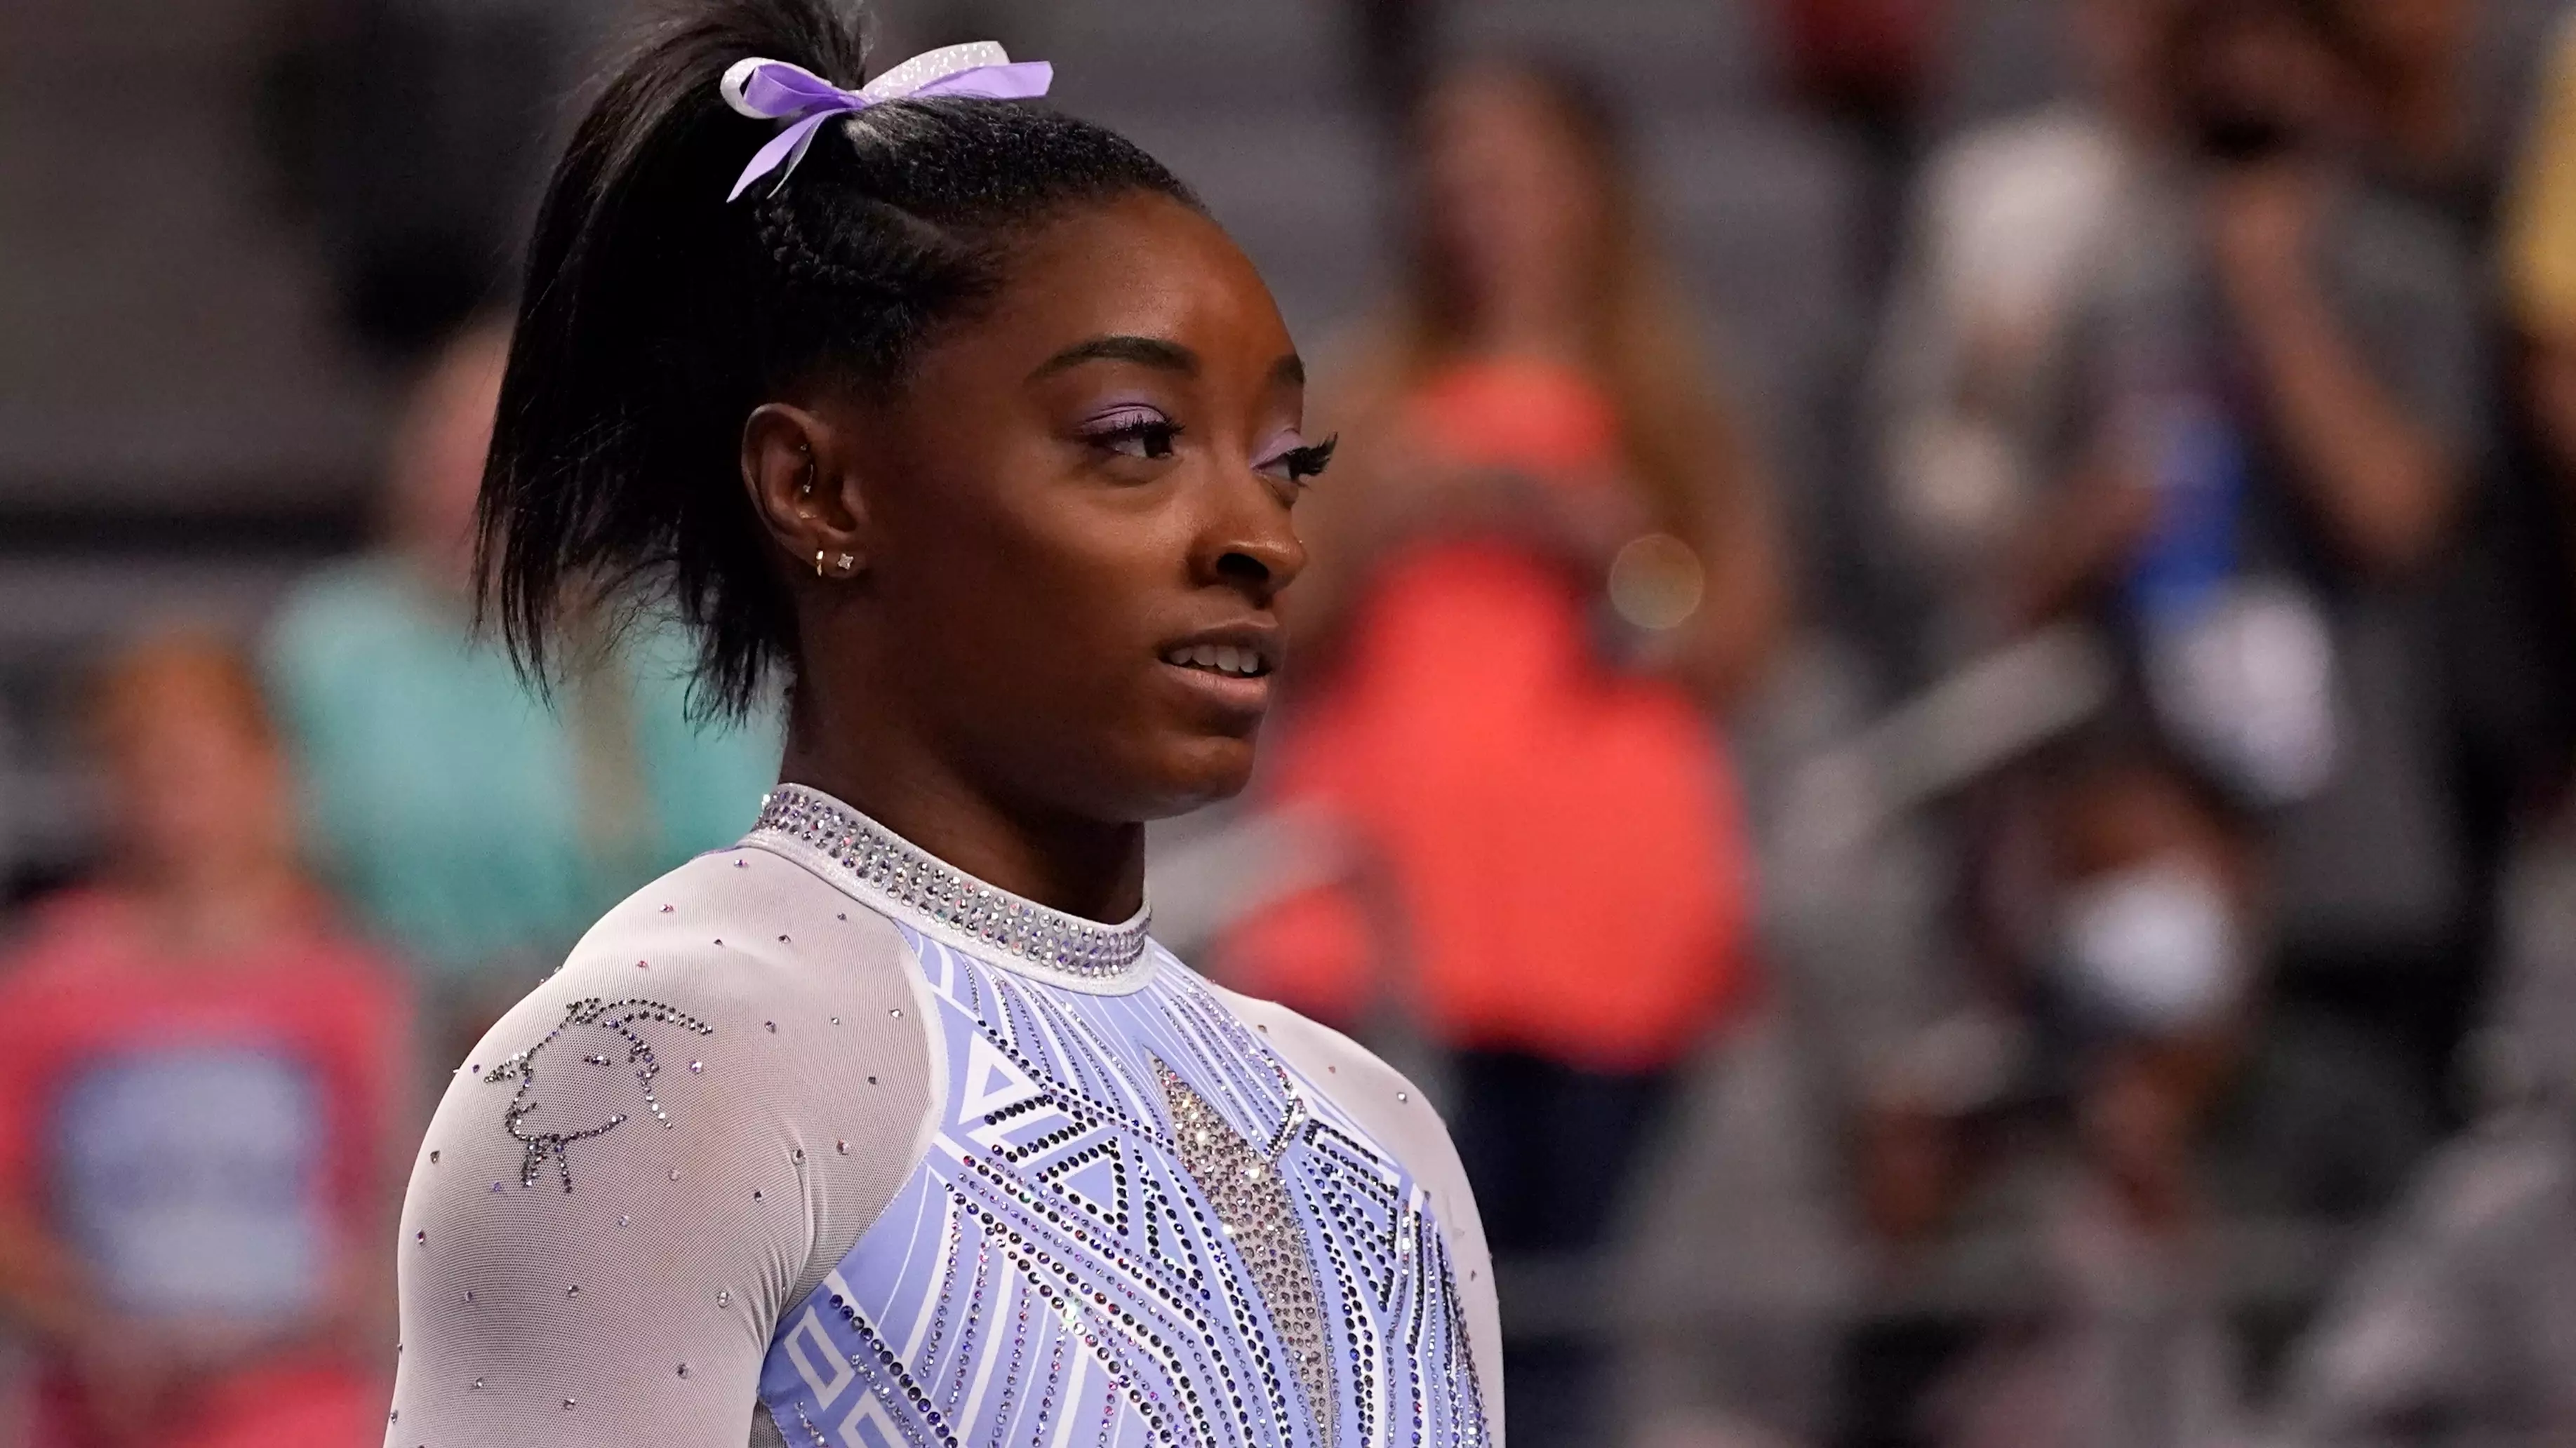 Simone Biles Has GOAT Imprinted On Her Leotard To 'Hit Back At The Haters'